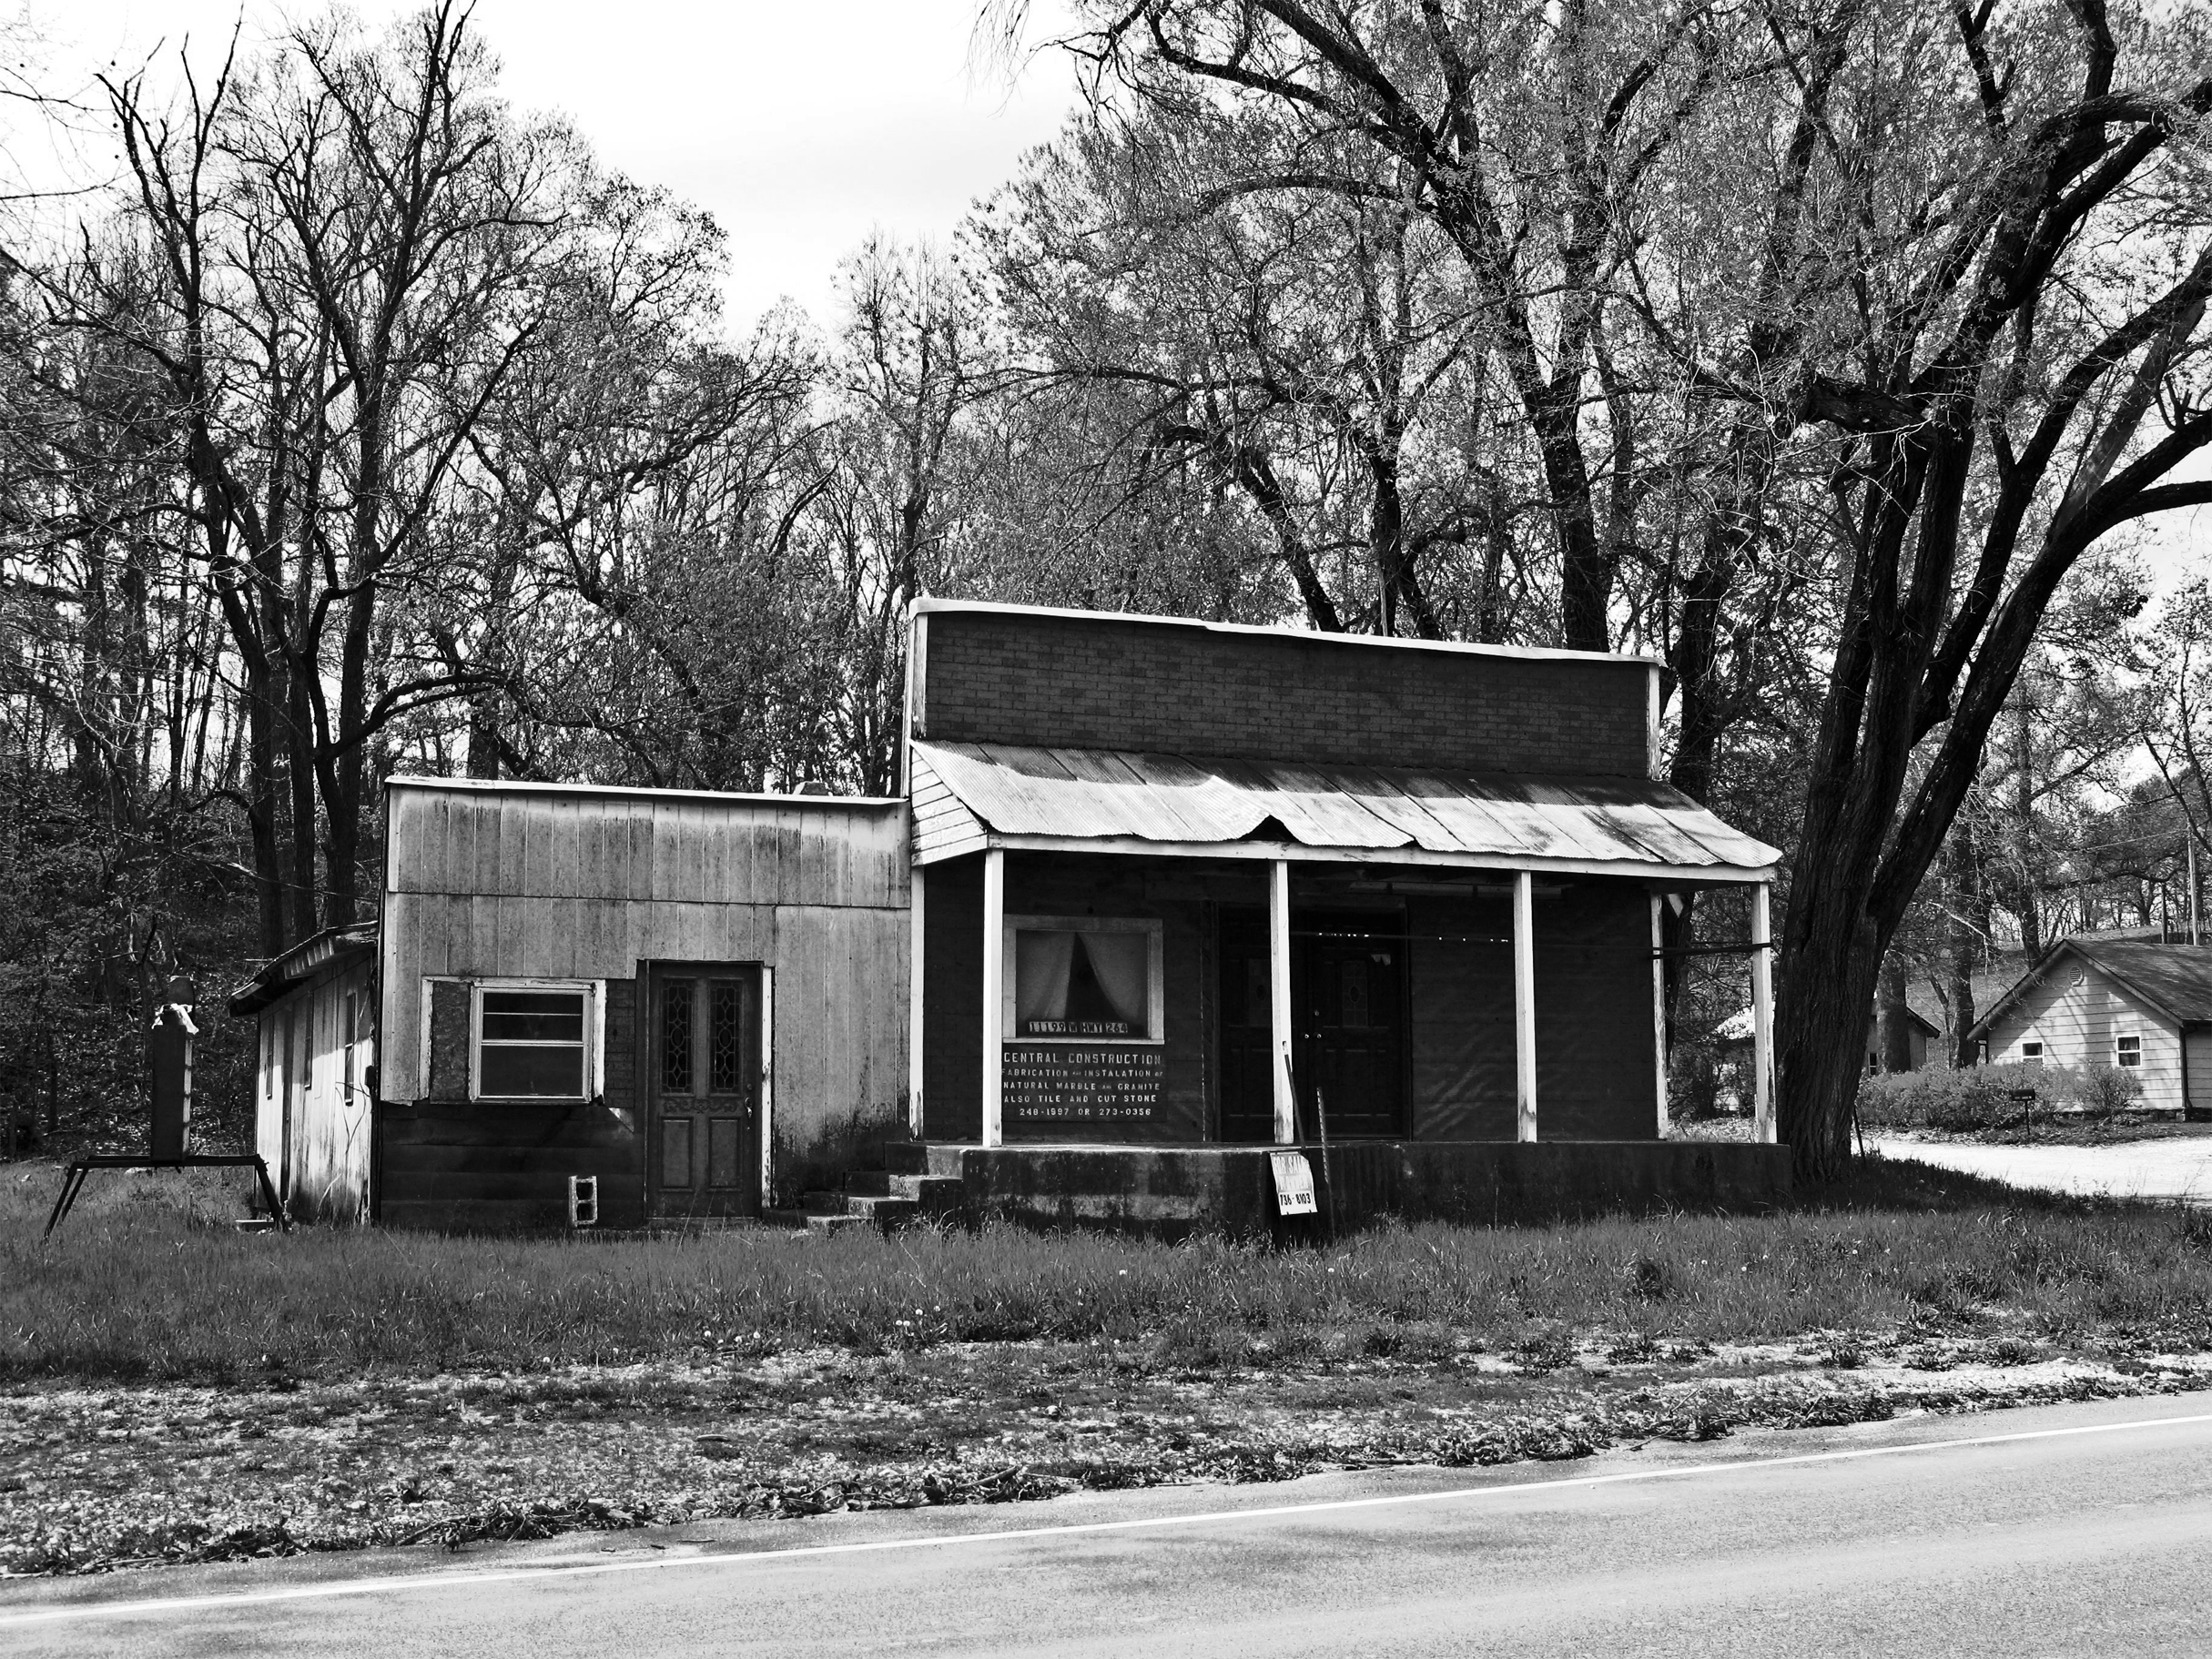    Old Store Front  , 2013. Healing Springs, Benton County, AR. B&amp;W HDR digital image. 